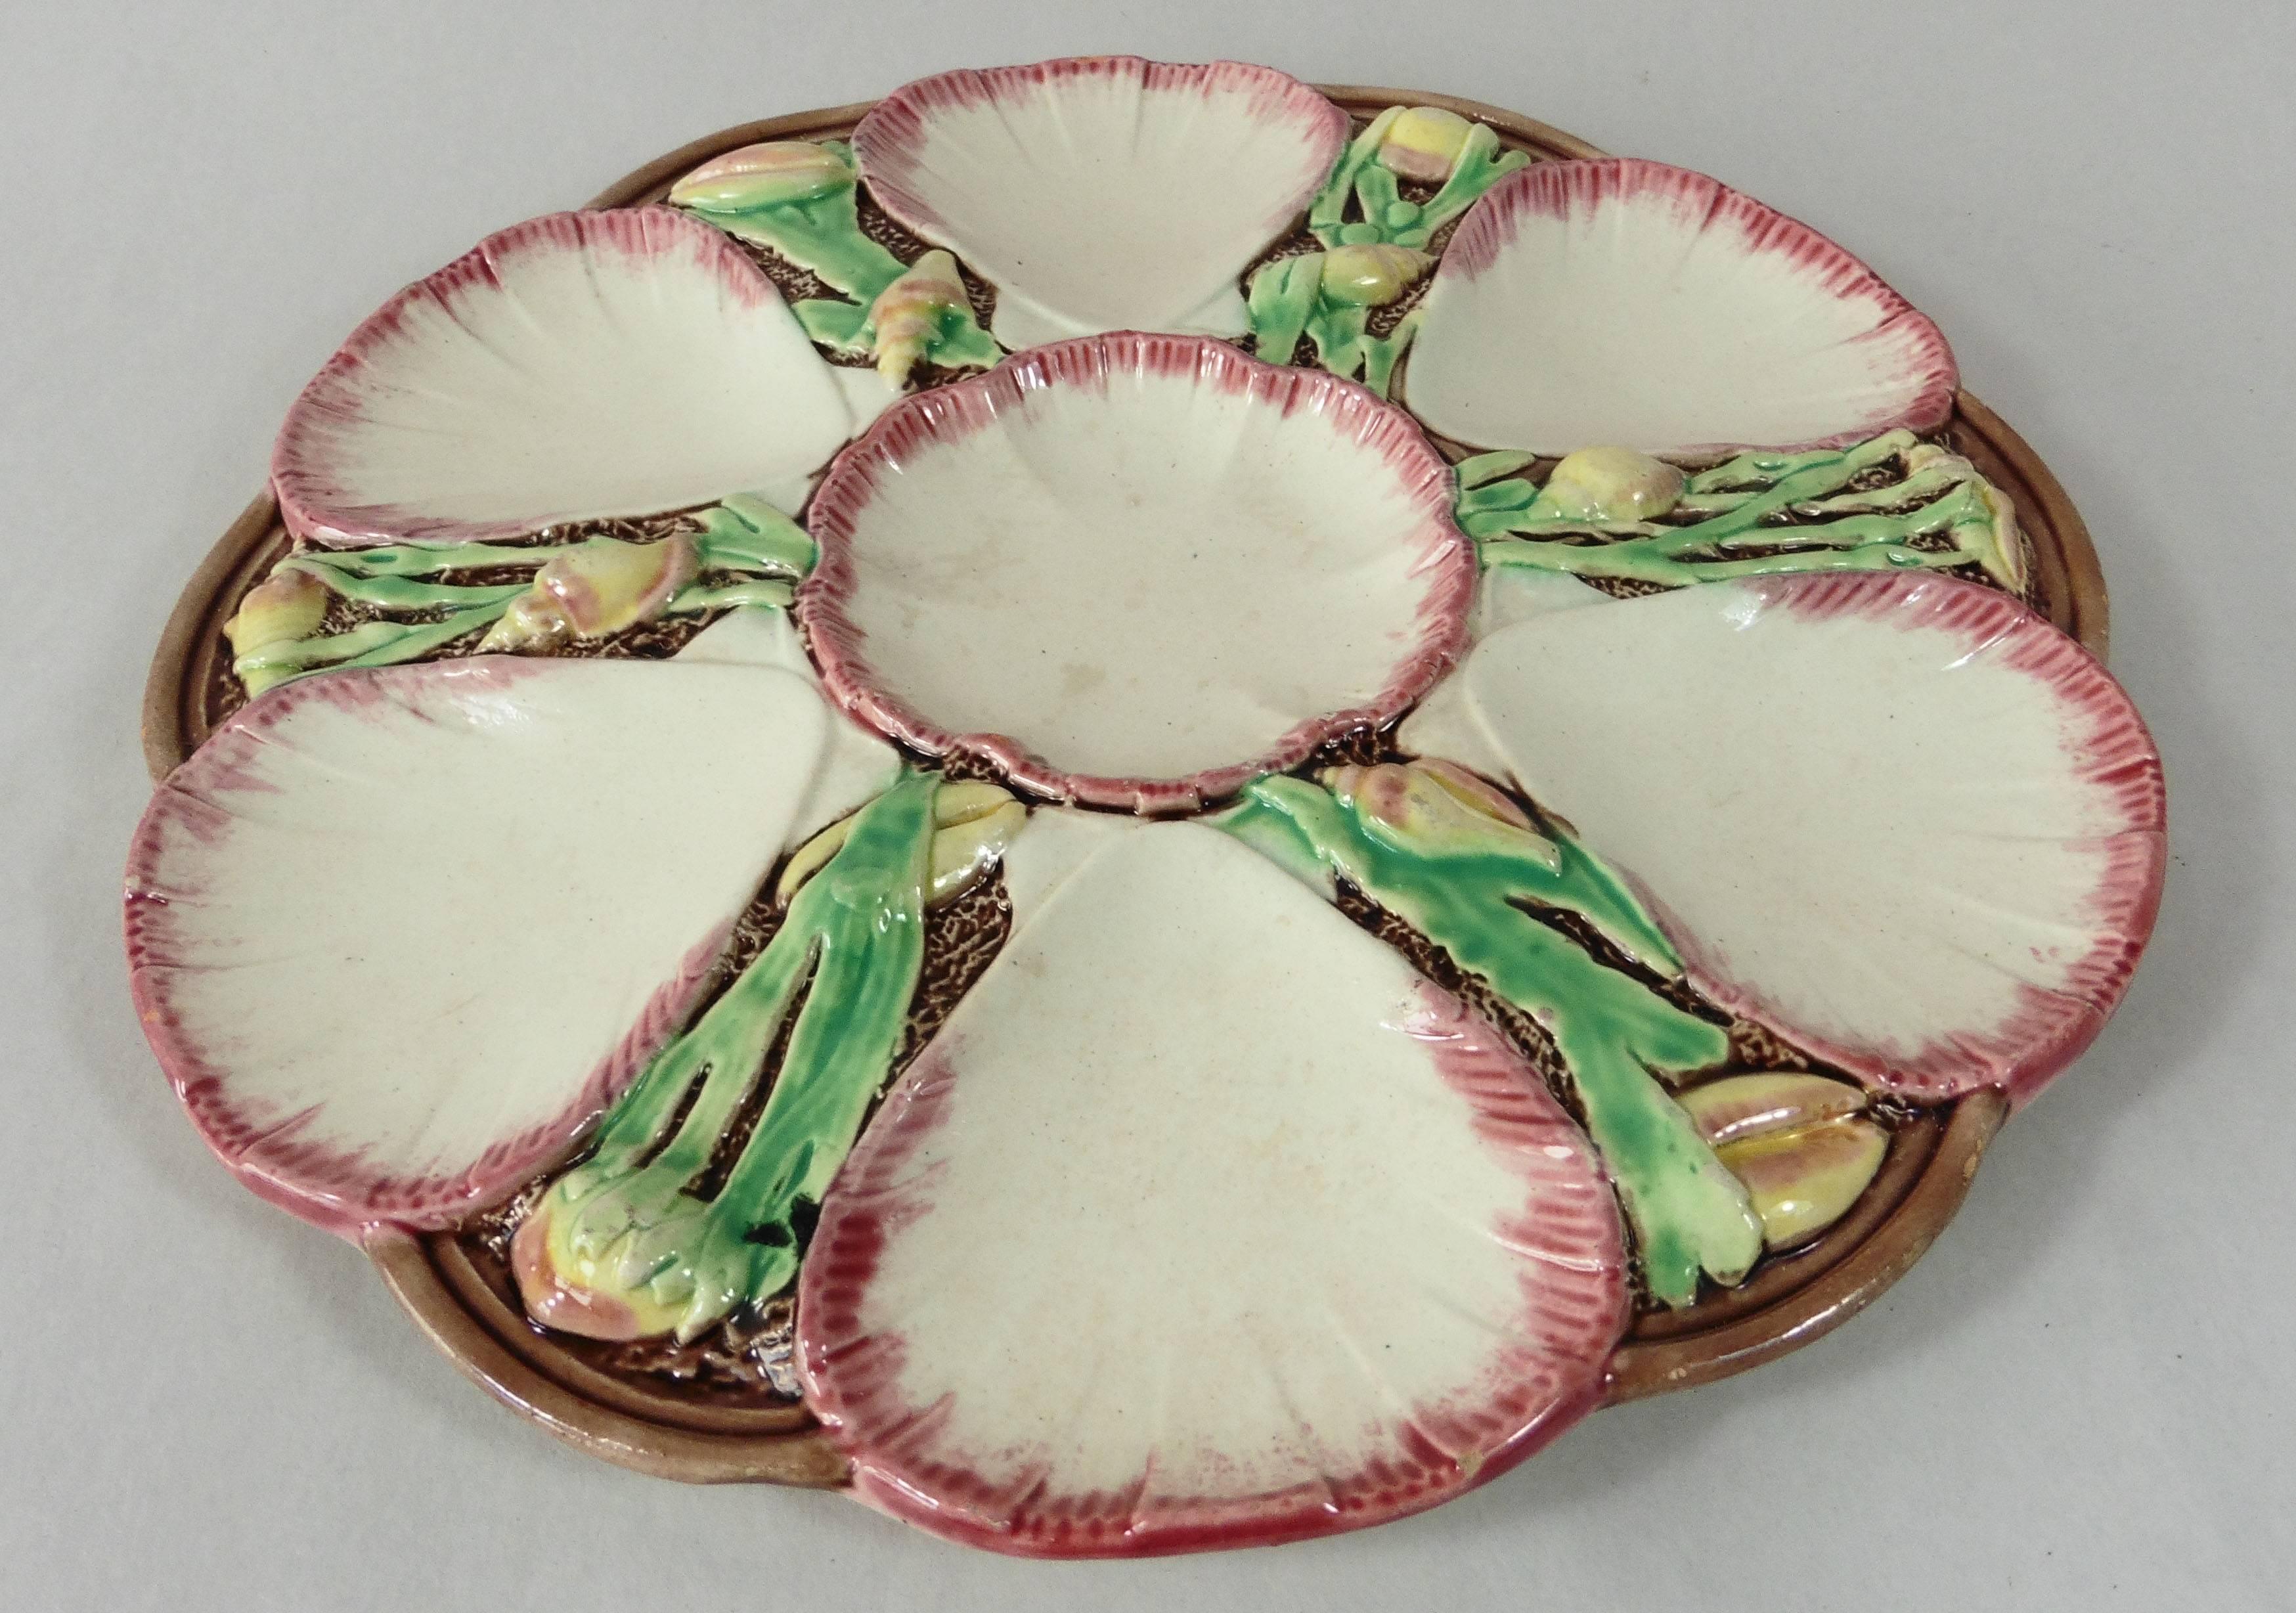 19th Majolica oyster plate with shells and seaweeds attributed to Victoria Pottery Company.
The Majolica of the Victorian Pottery Company is rarely seen because it was a brief production (1882-1889) it's also rarely signed. The production is among